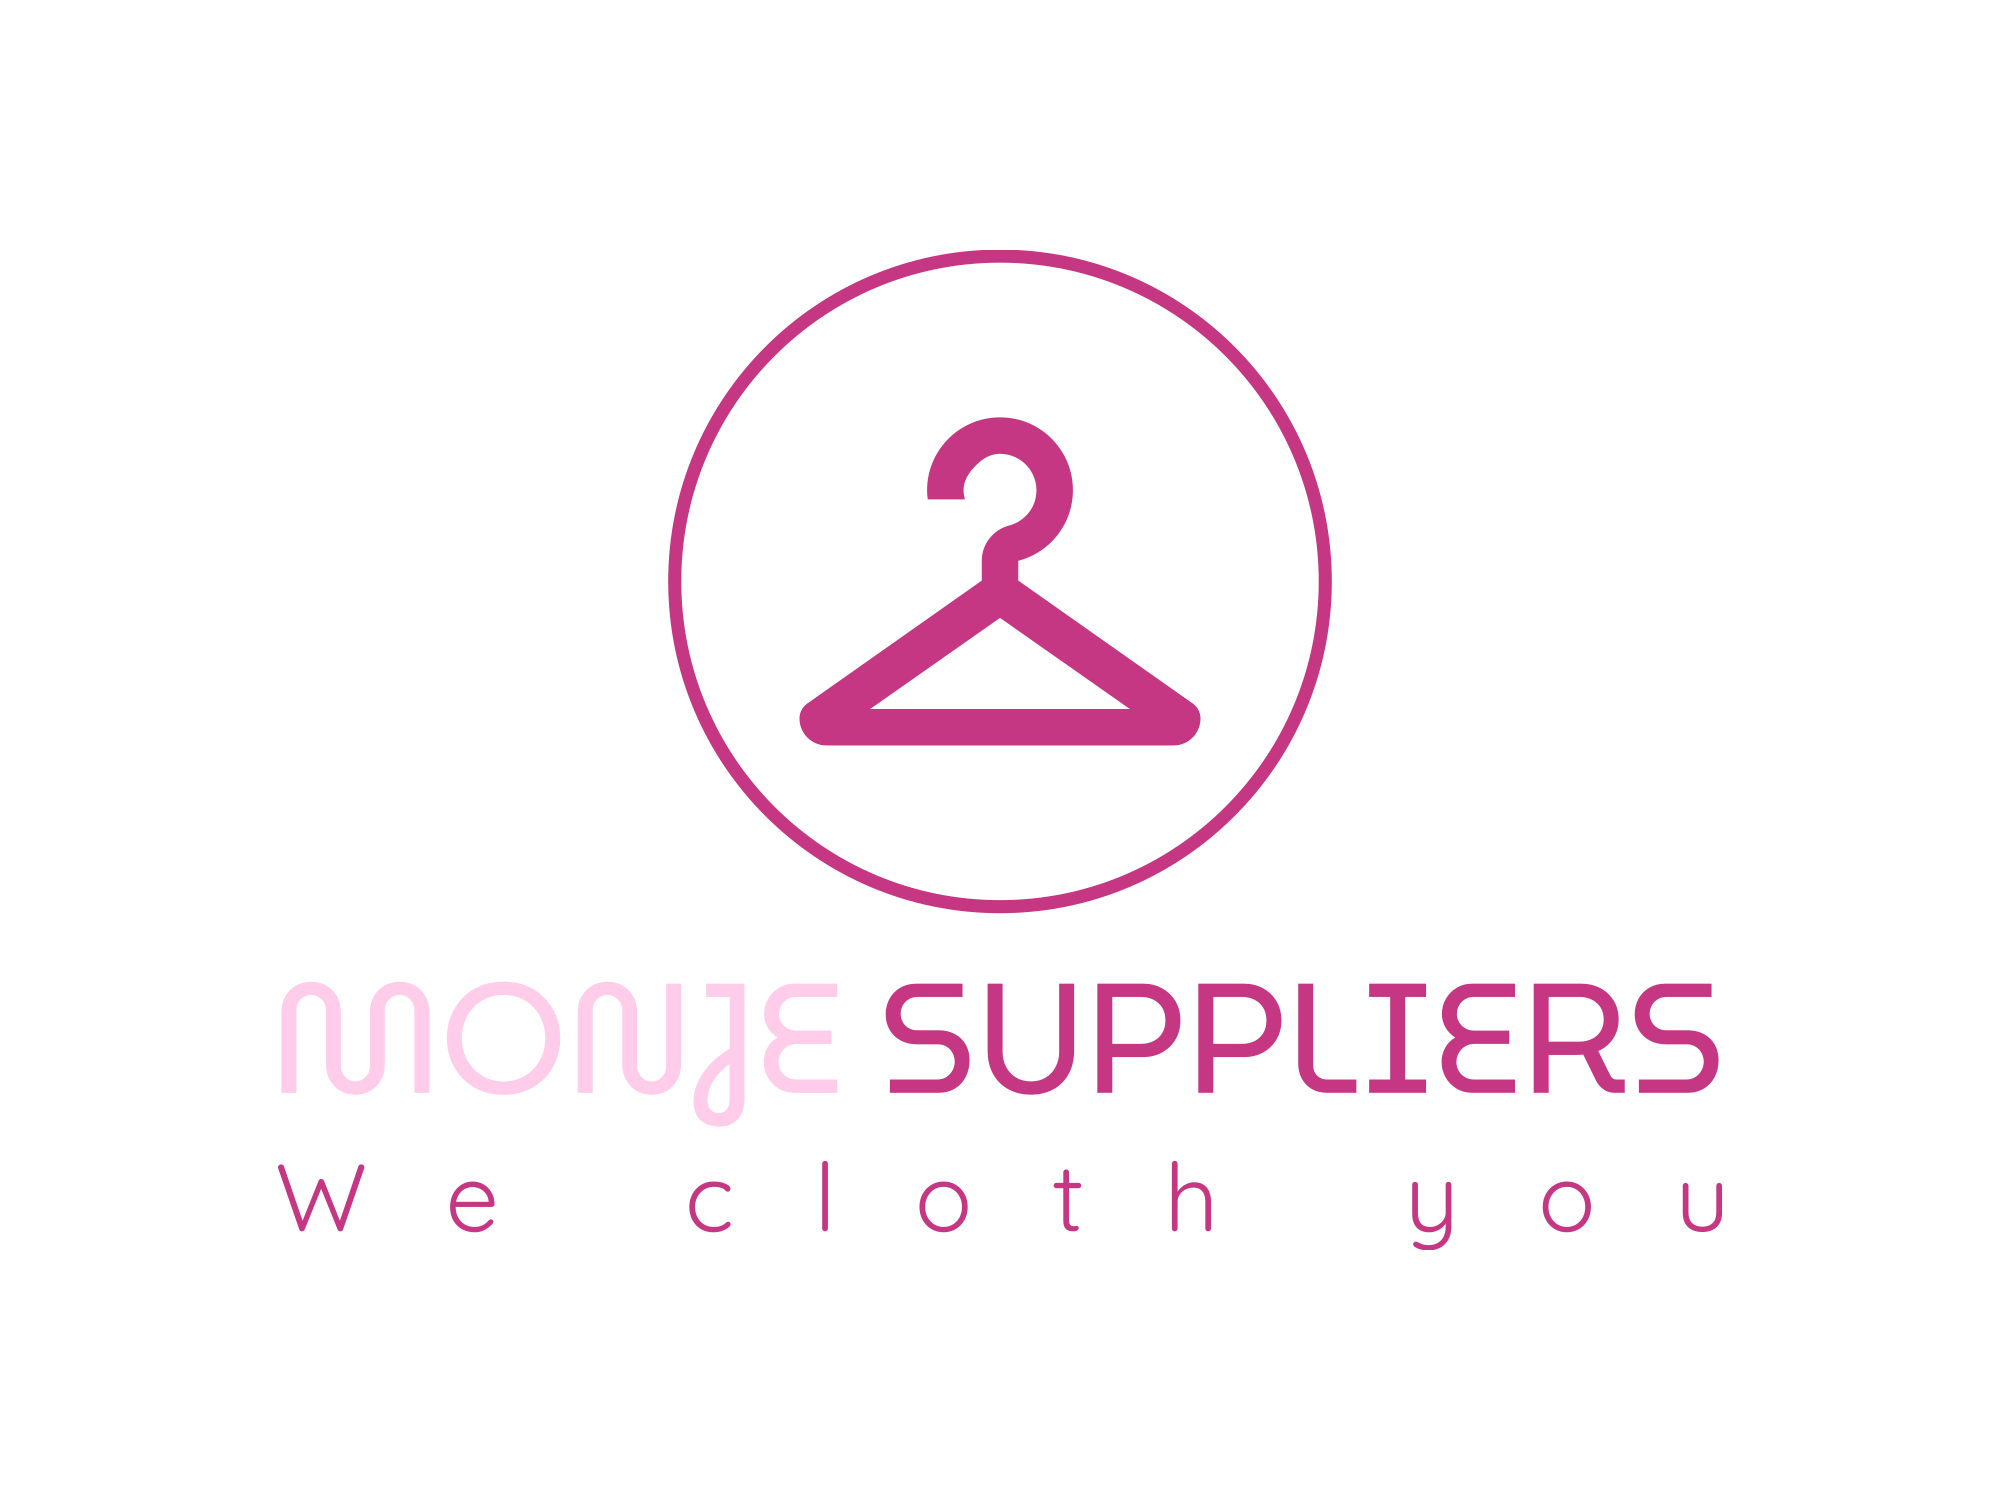 Monje suppliers